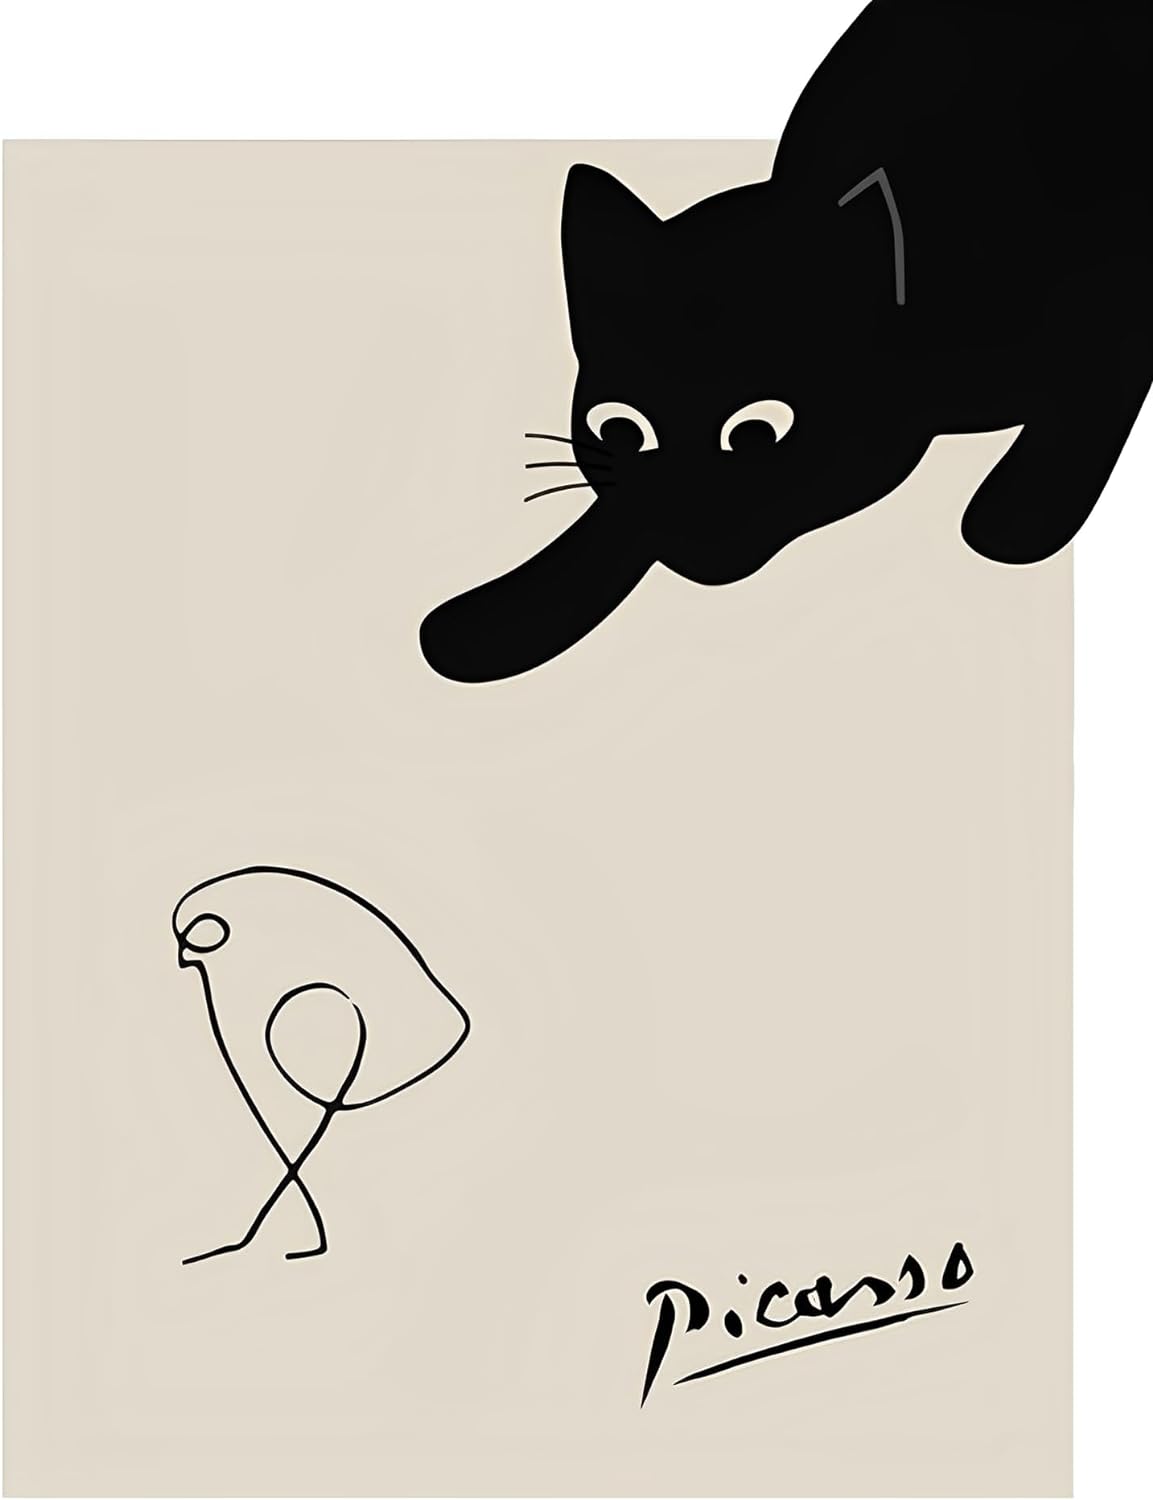 jenesaisquoi Picasso Wall Art The Cat & Bird of Picasso Artwork Picasso Posters Canvas Wall Art for Living Room Bedroom Office (Unframed, 12 x 16)